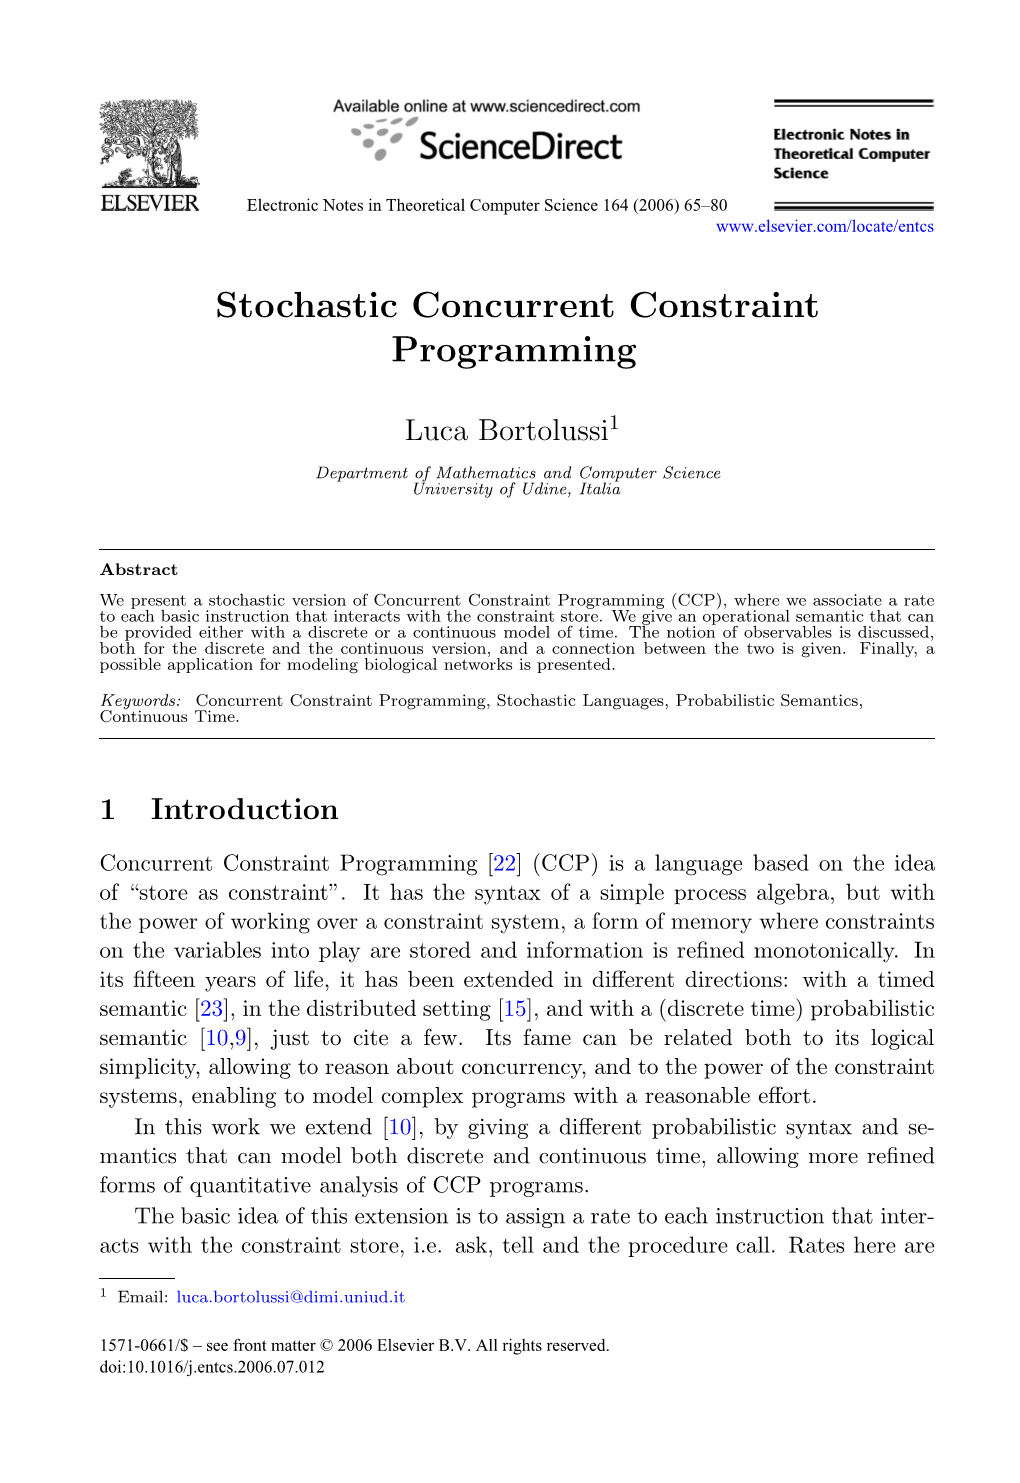 Stochastic Concurrent Constraint Programming